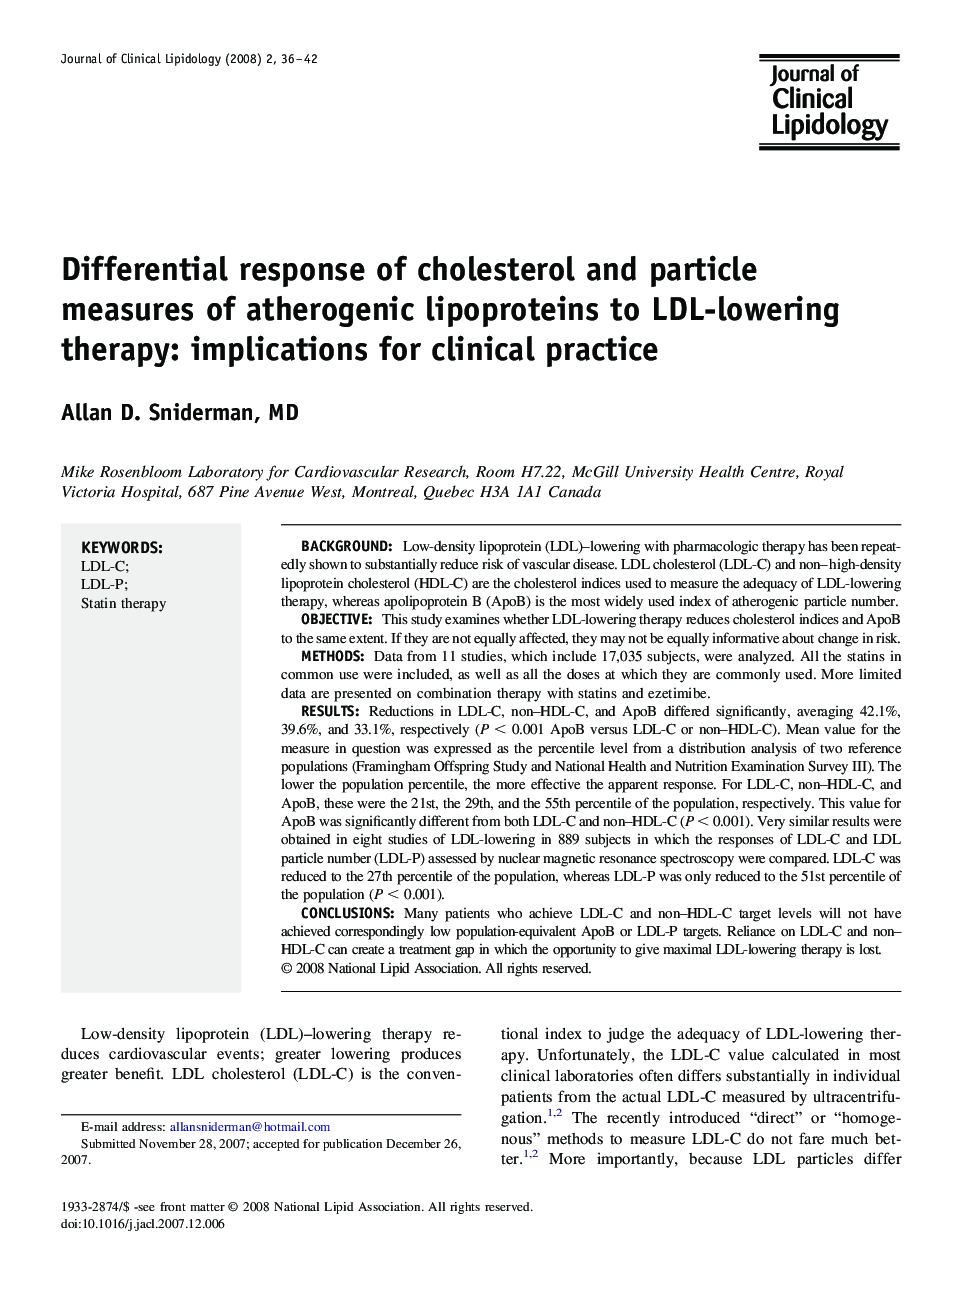 Differential response of cholesterol and particle measures of atherogenic lipoproteins to LDL-lowering therapy: implications for clinical practice